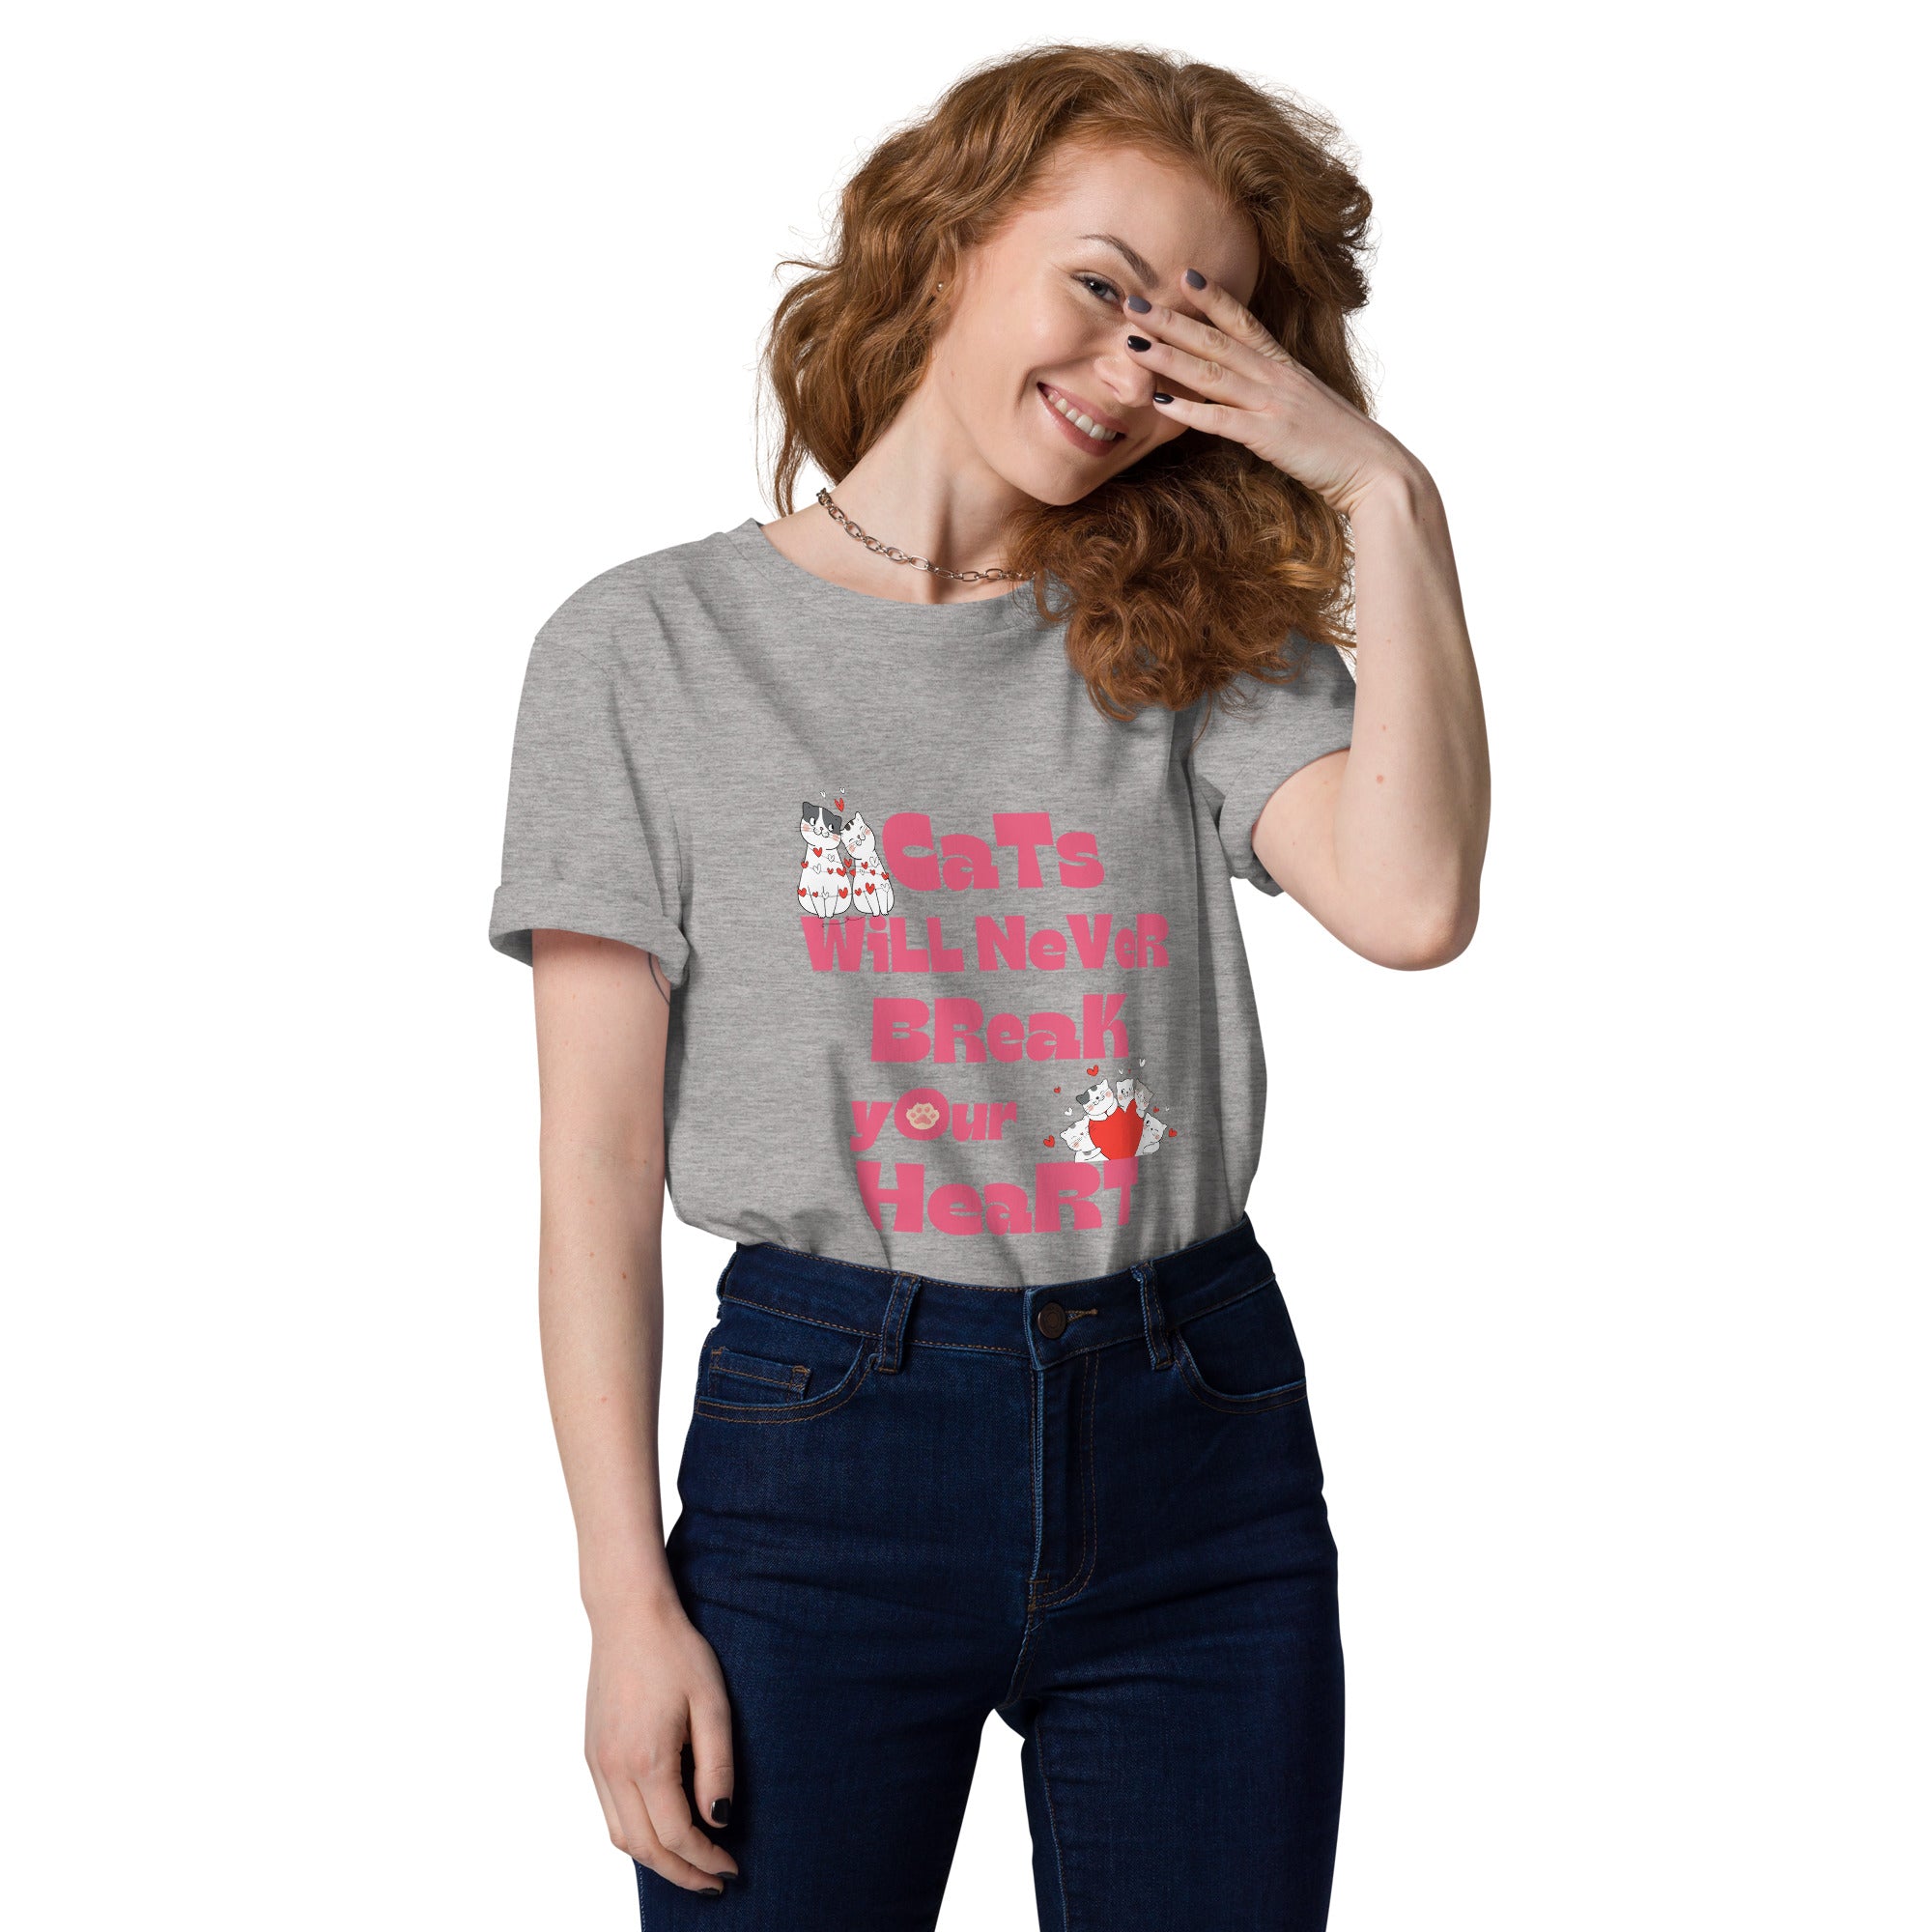 Shop Cats Will Never Break Your Heart Valentine's Organic Cotton T-shirt, T-shirts, USA Boutique